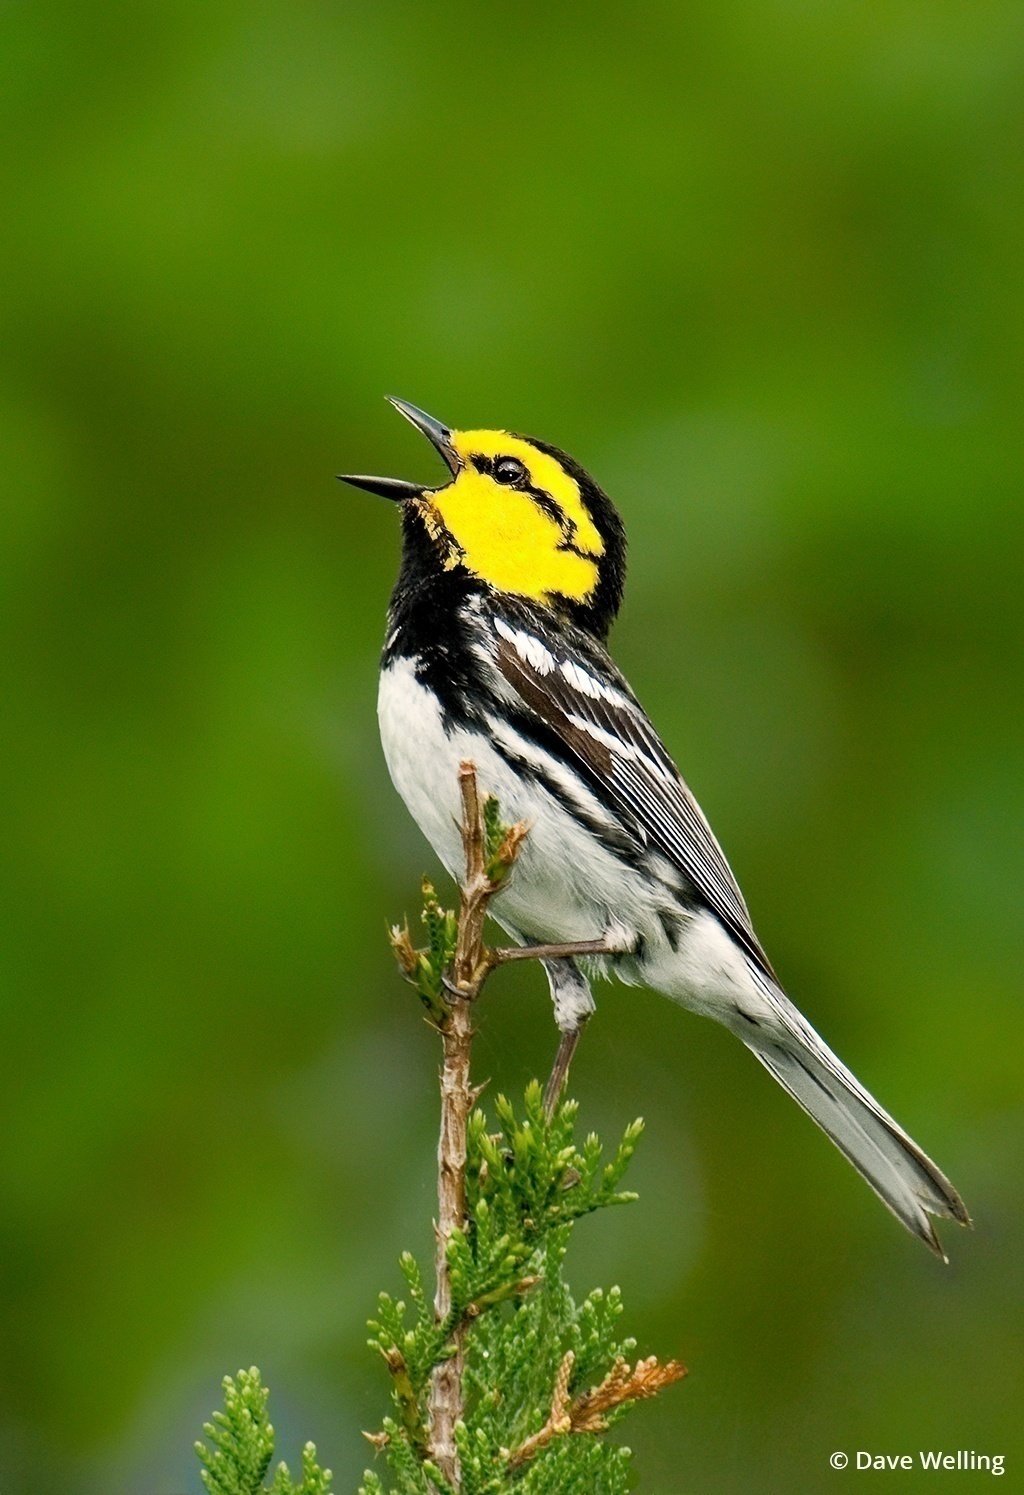 Image of a golden-cheeked warbler.